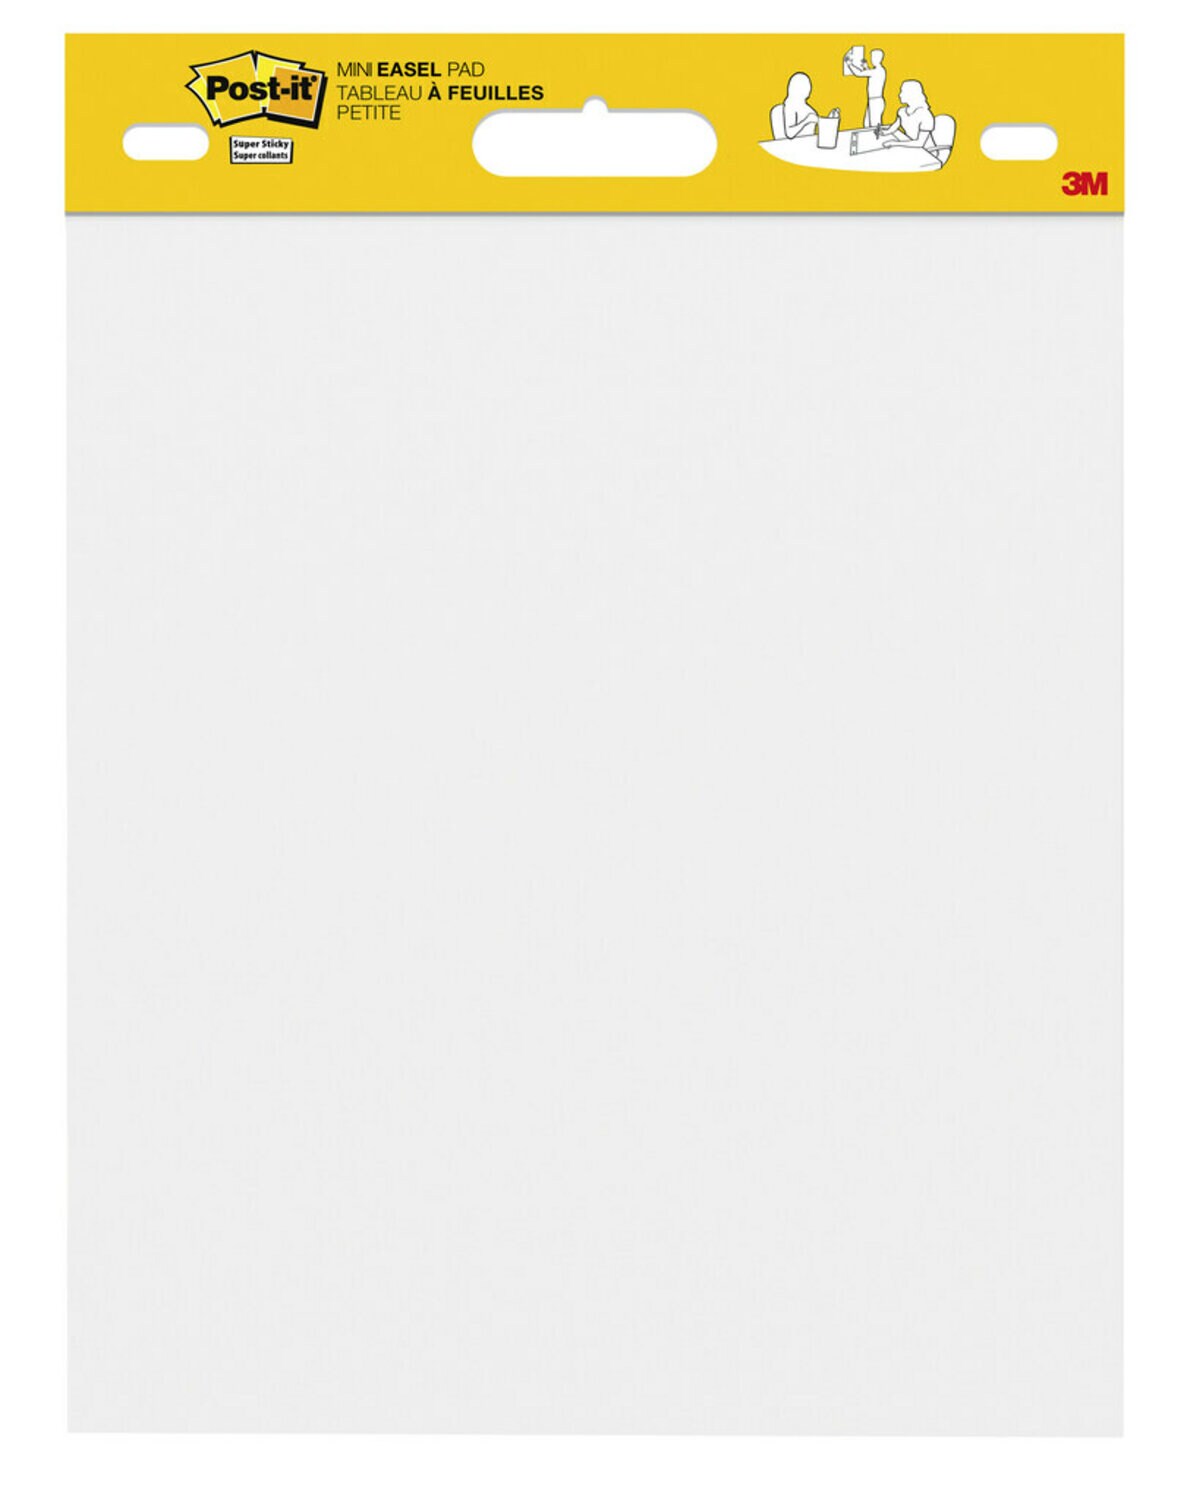 7100220641 - Post-it Self-Stick Easel Pad 577SS, 15 in x 18 in (38.1 cm x 45.7 cm), 20 Sheets/Pad, 1 Pad